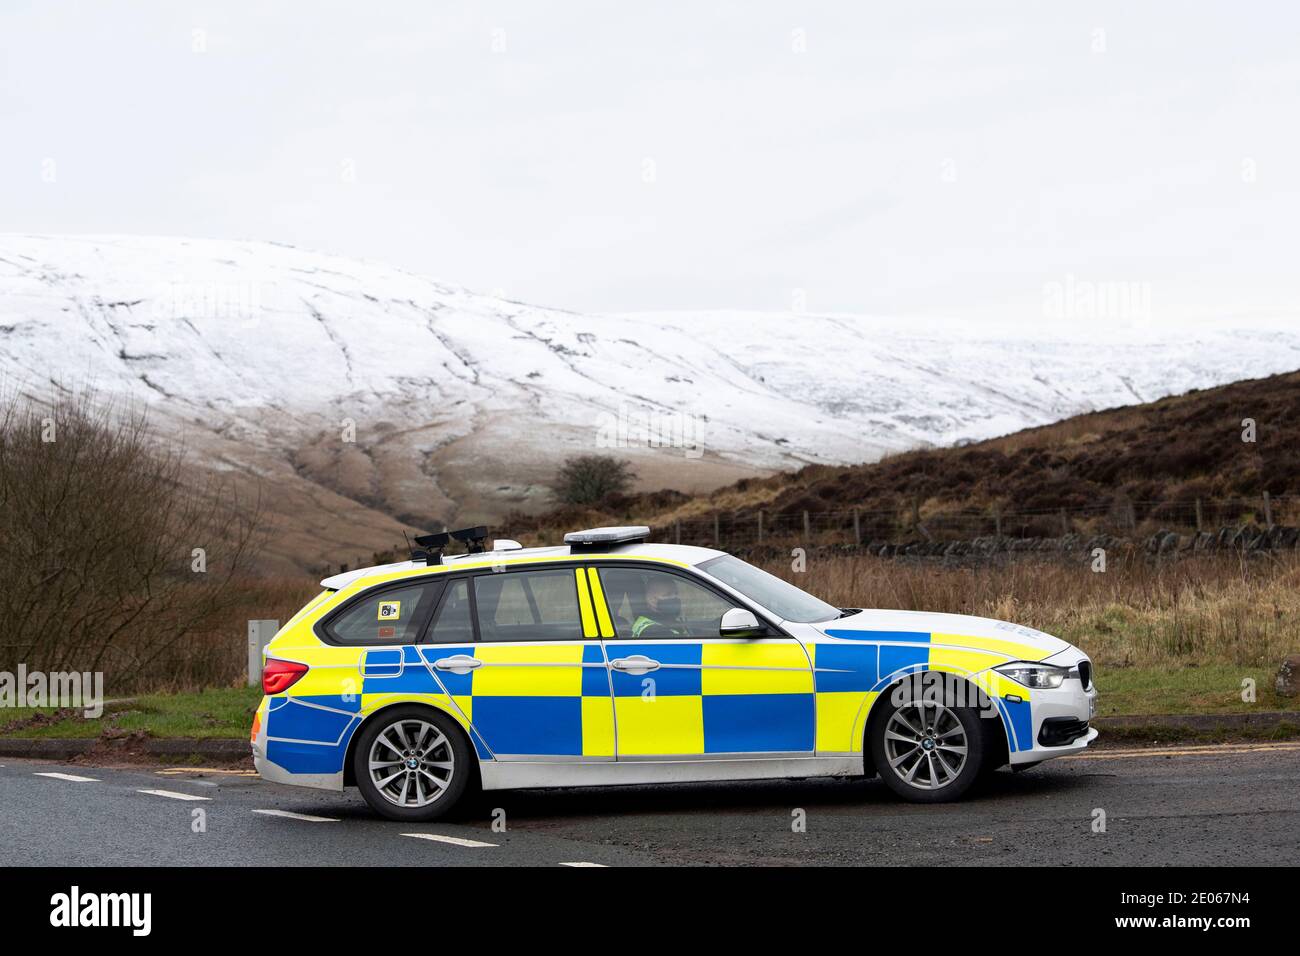 BRECON, WALES - DECEMBER 30: A police car at Storey Arms on December 30, 2020 in Brecon, Wales. Wales went into a Level 4 lockdown from midnight on De Stock Photo